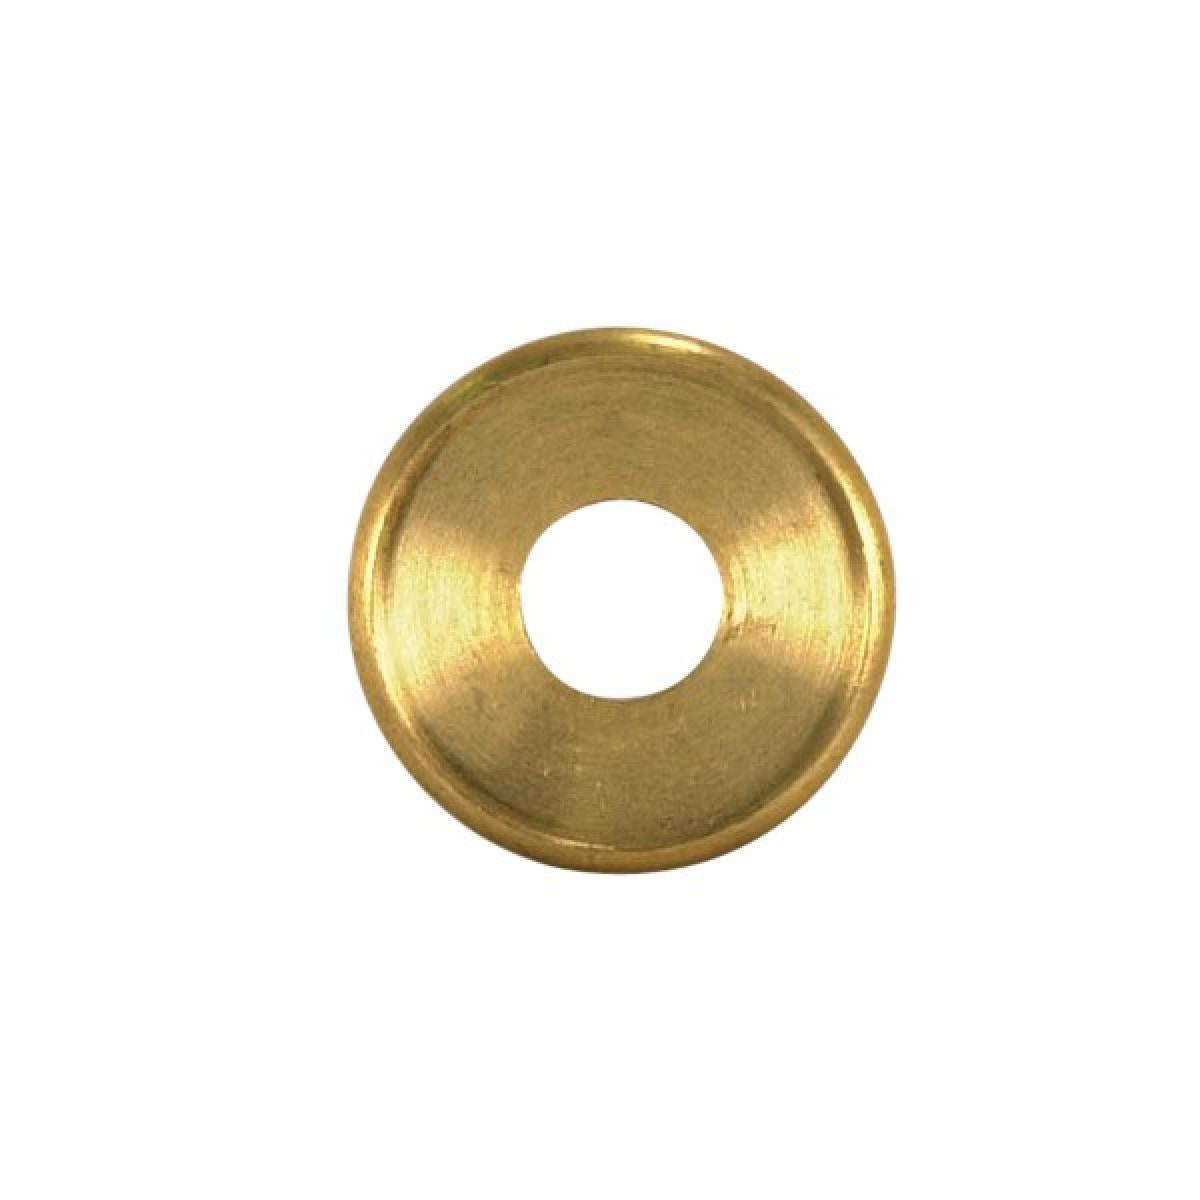 Satco 90-1605 Turned Brass Check Ring 1/8 IP Slip Unfinished 1-3/4" Diameter